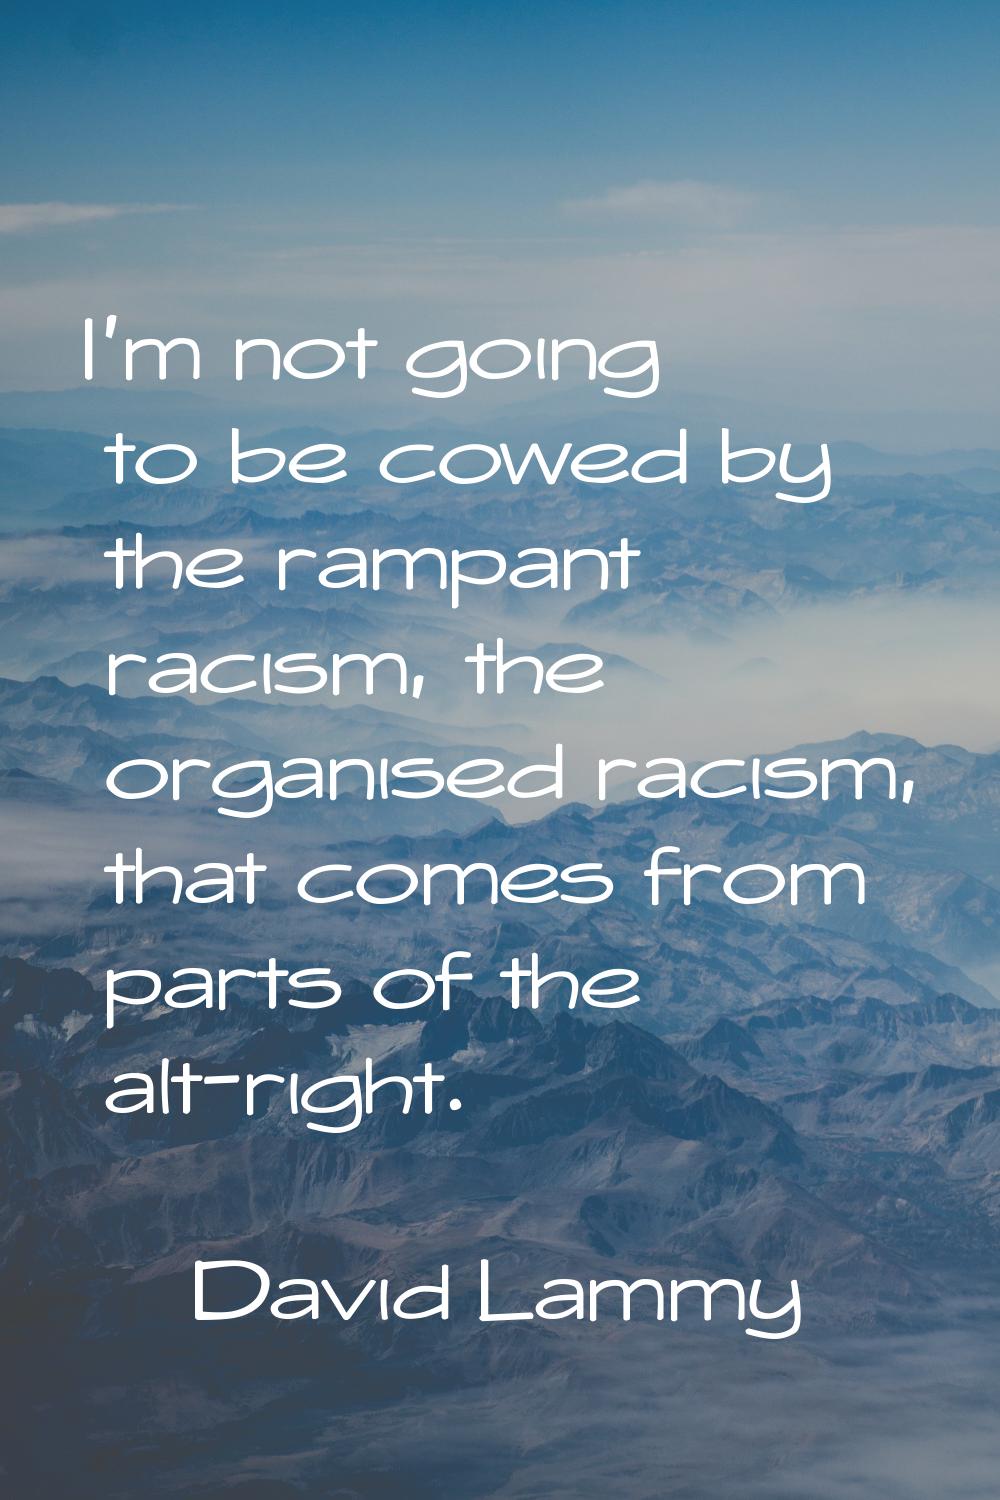 I'm not going to be cowed by the rampant racism, the organised racism, that comes from parts of the